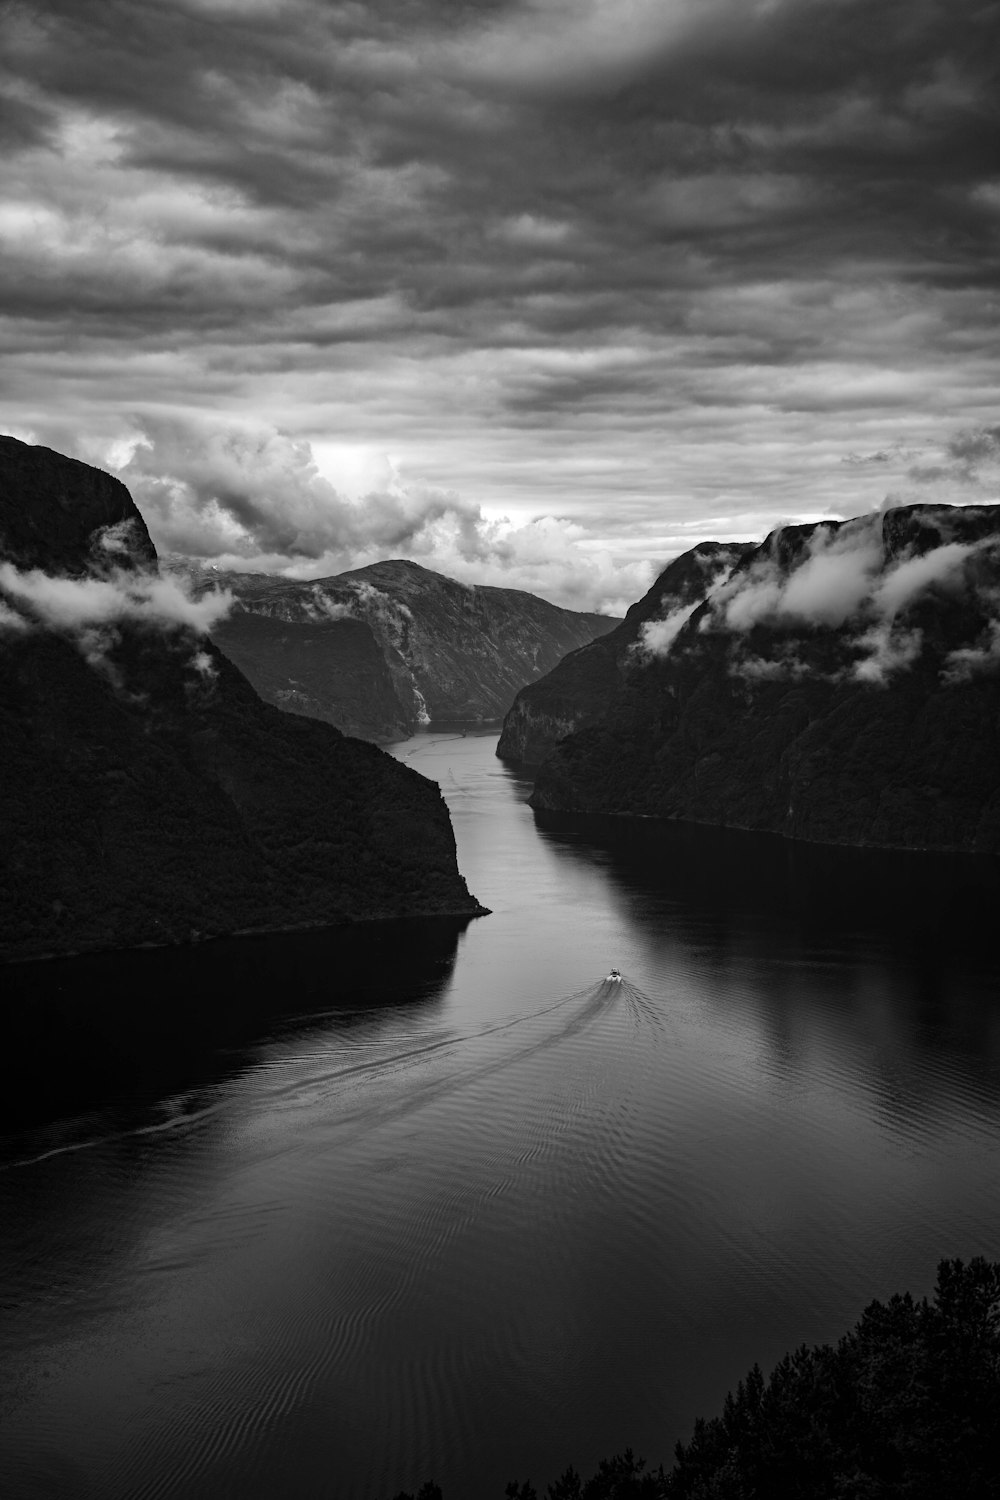 a black and white photo of a body of water surrounded by mountains